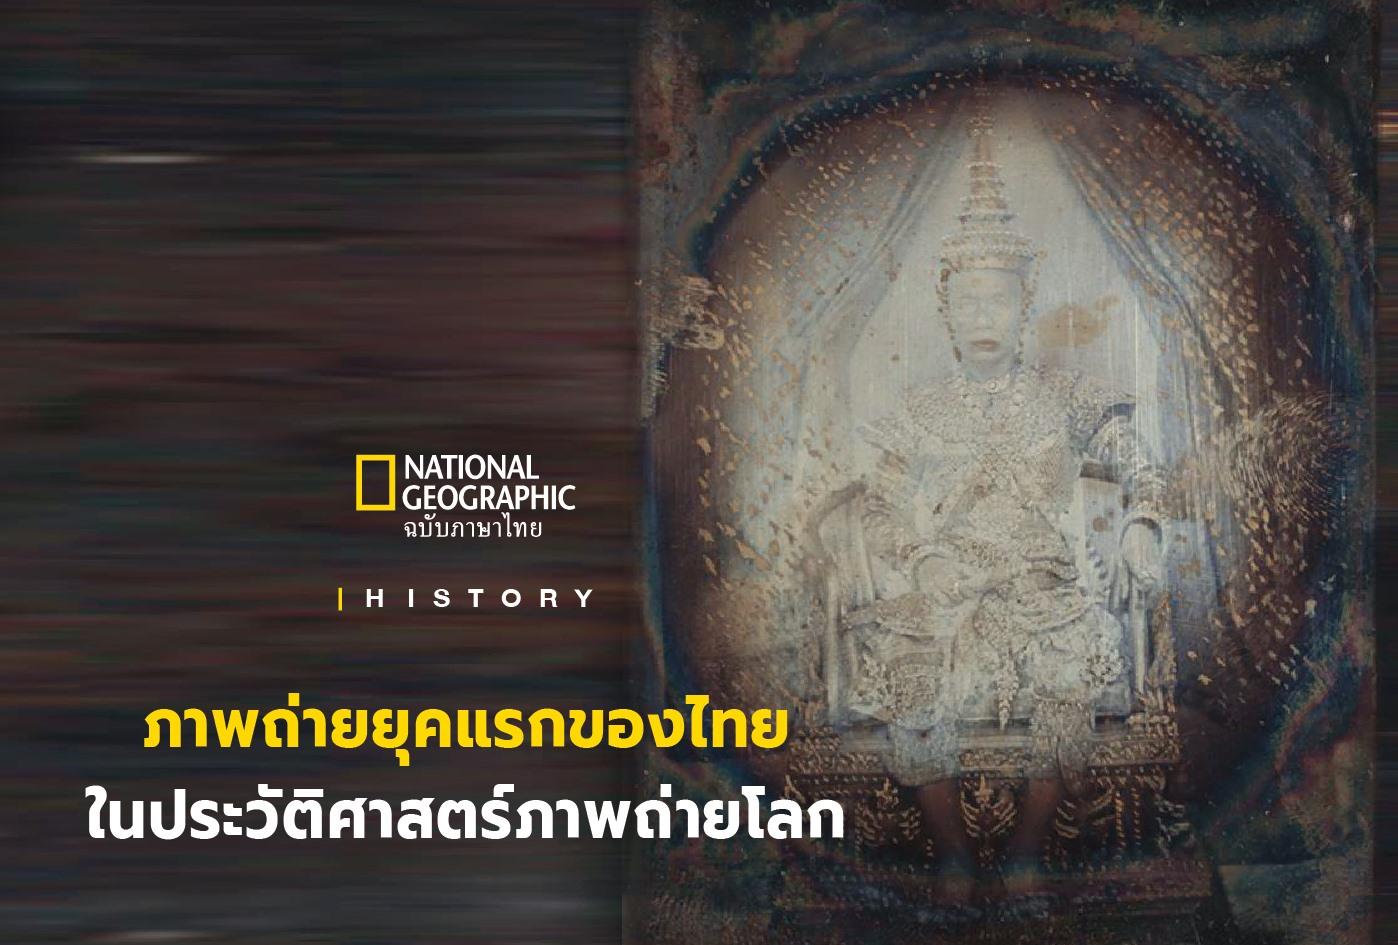 Thumbnail of "Early photography in Thailand" in Nat Geo Thailand